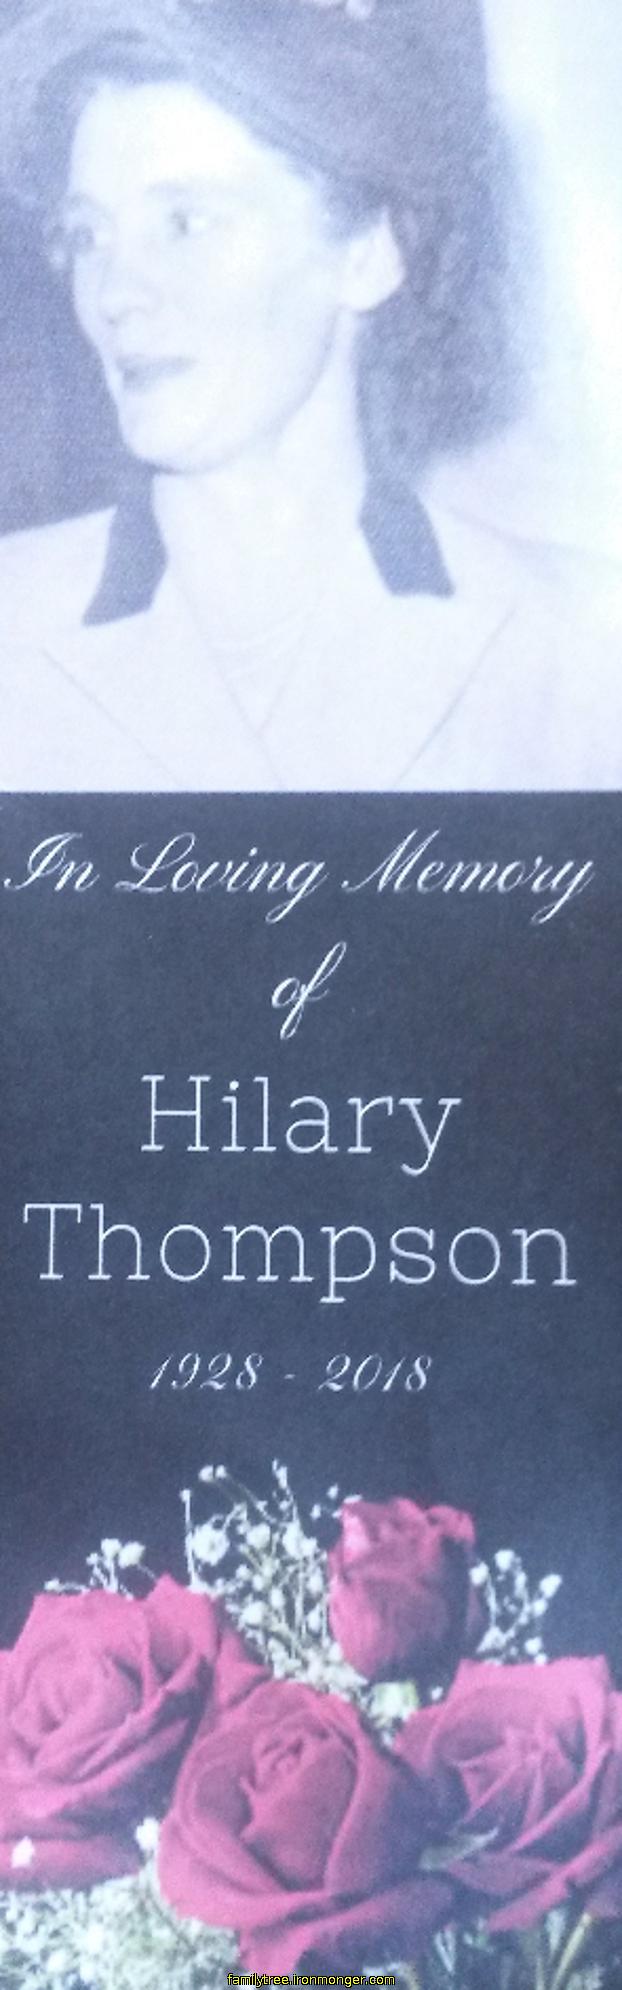 Photo and card handed out at funeral for Hillary Ironmonger